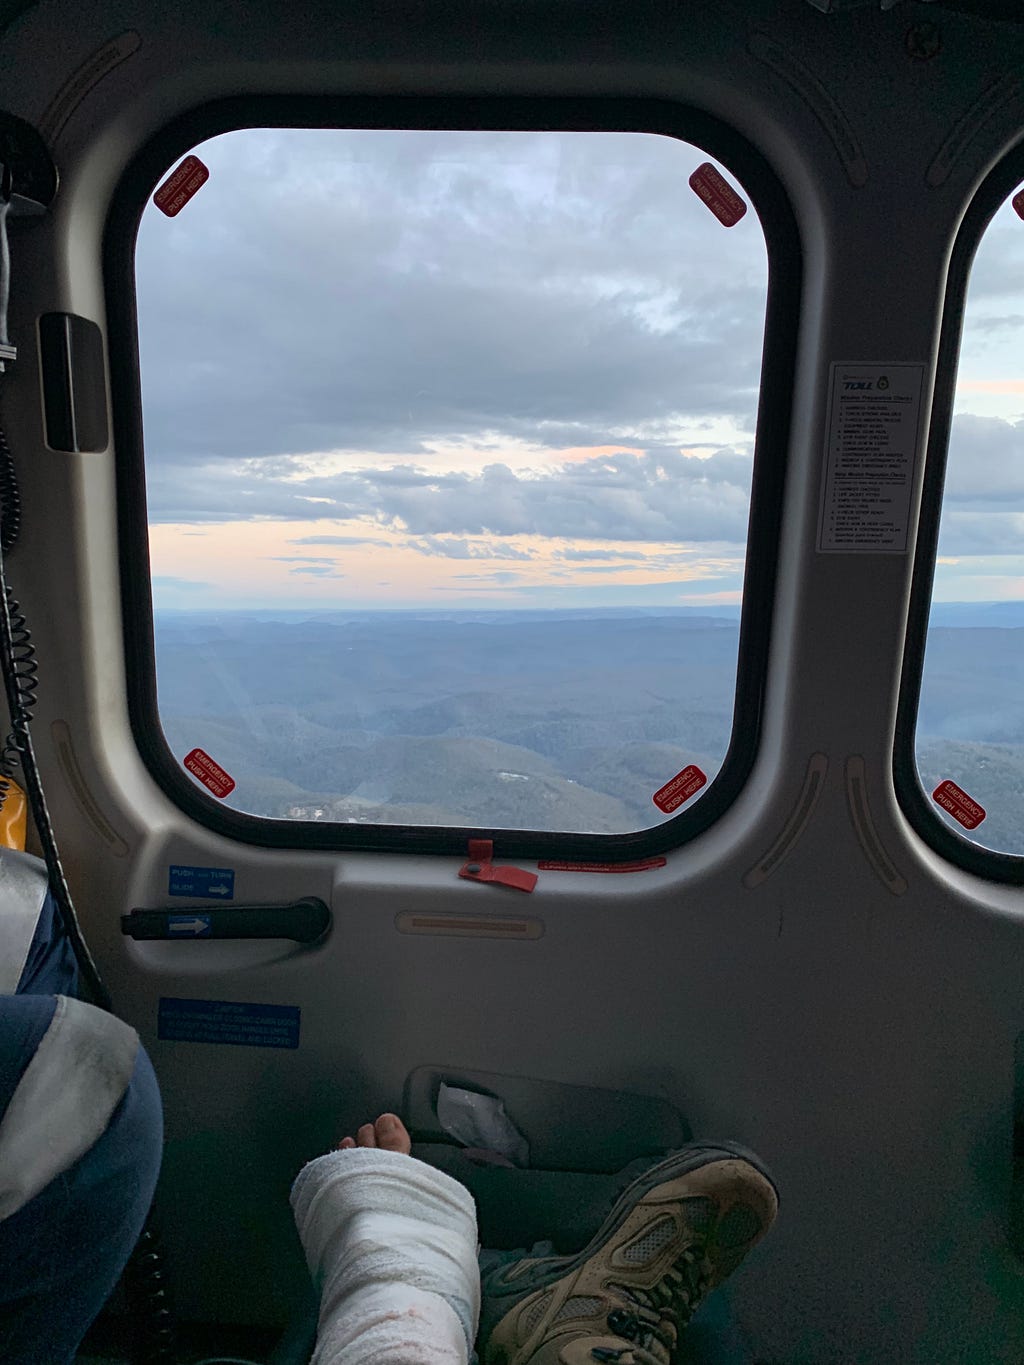 In a helicopter. There’s two feet. One is bandaged the other is wearing a boot. There’s beautiful mountains in the view.